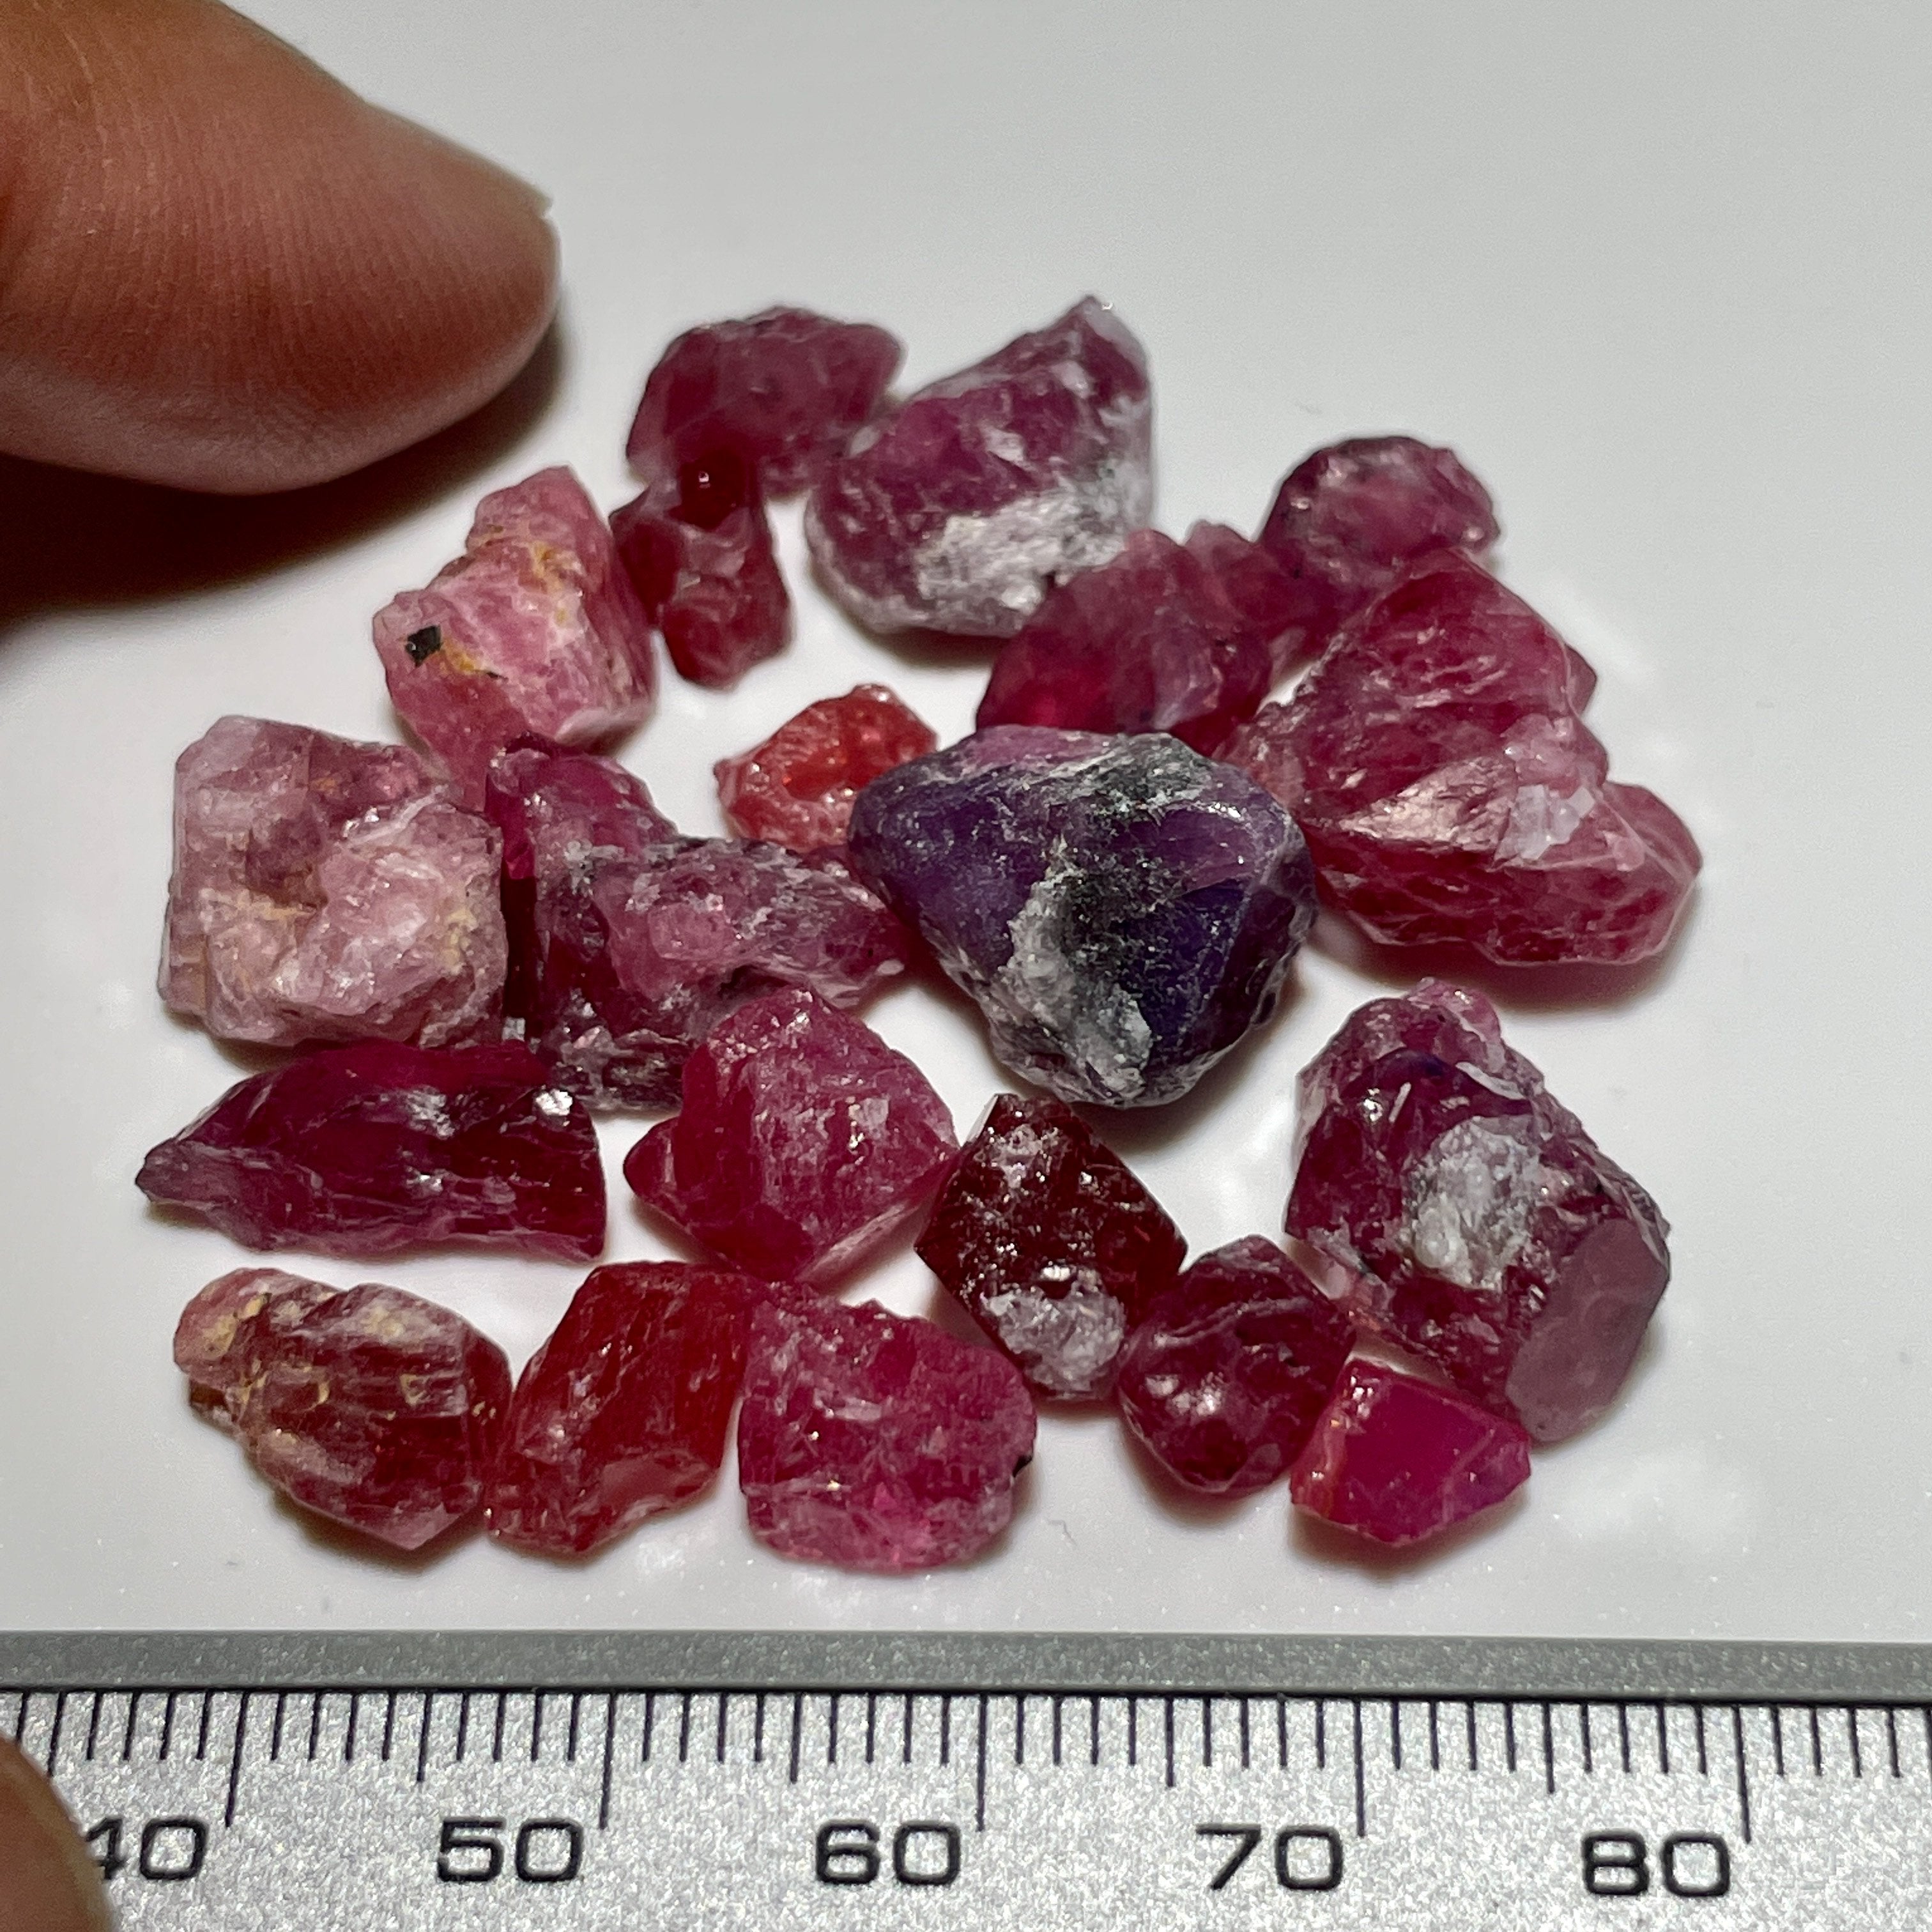 113.06Ct Mahenge Spinel Crystal Lot 1.49Ct - 13.96Ct Tanzania. Untreated Unheated. Good For Setting